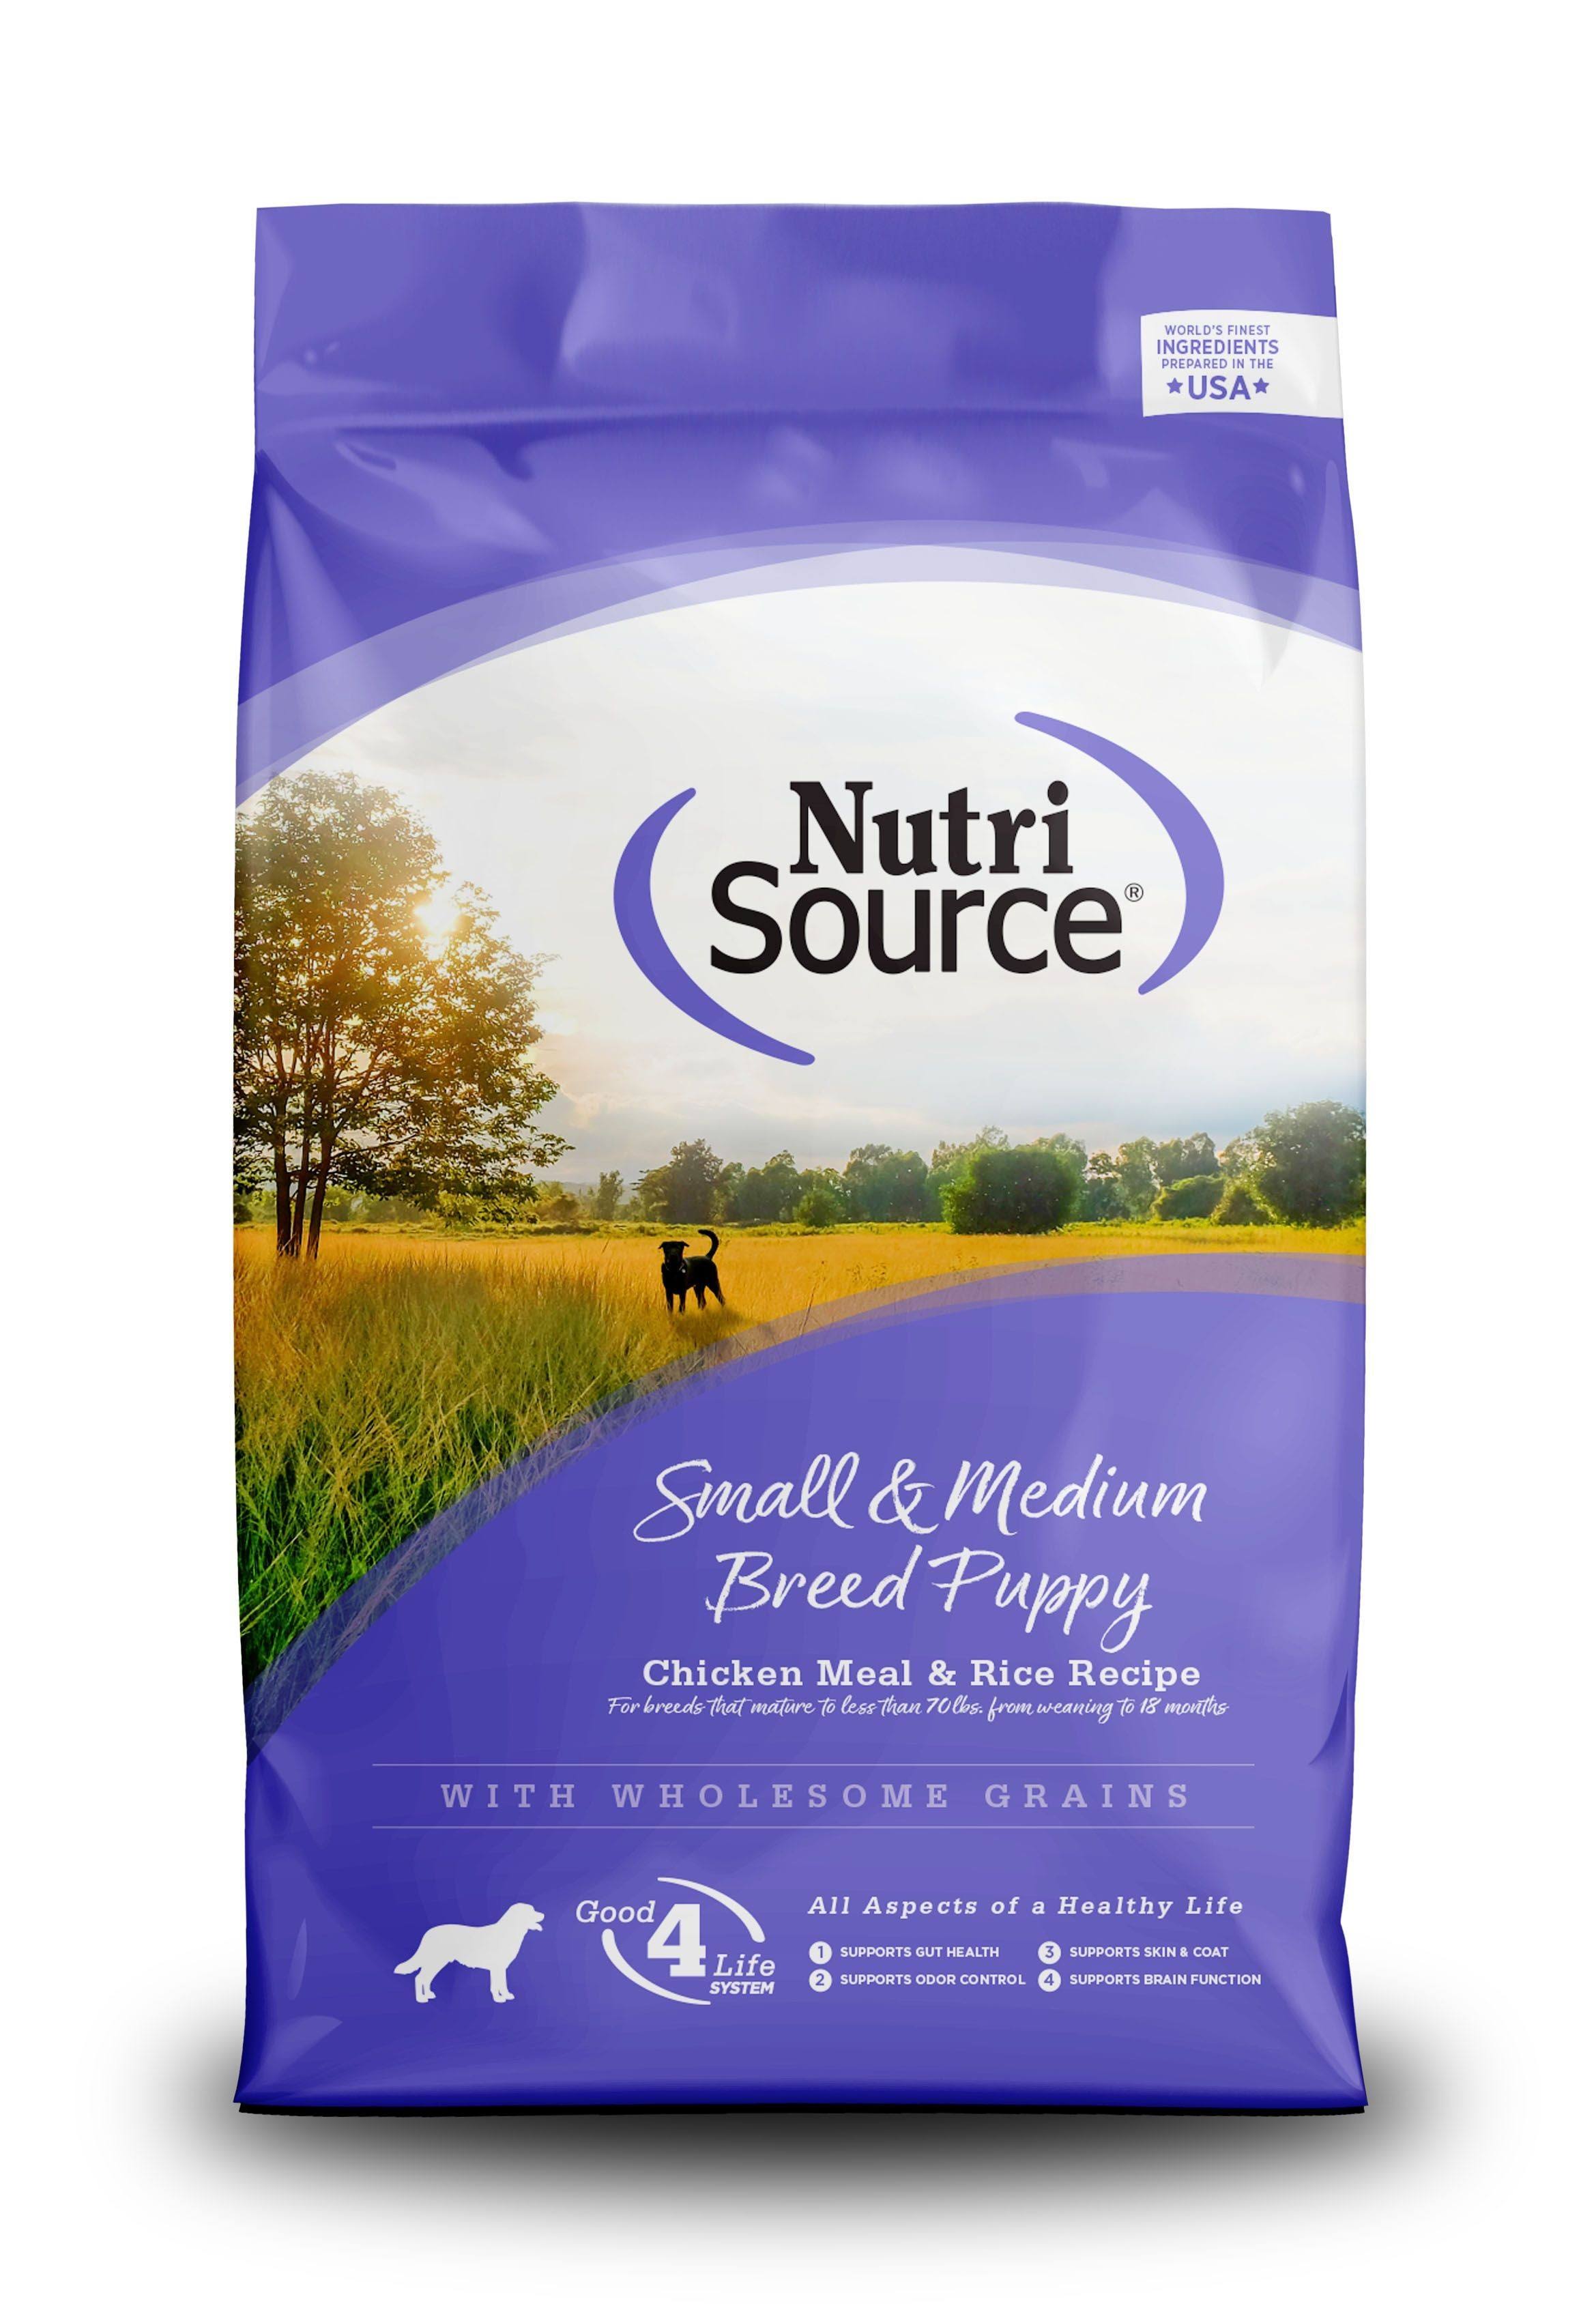 NutriSource Small & Medium Breed Puppy Chicken & Rice Dry Dog Food - 26 lb